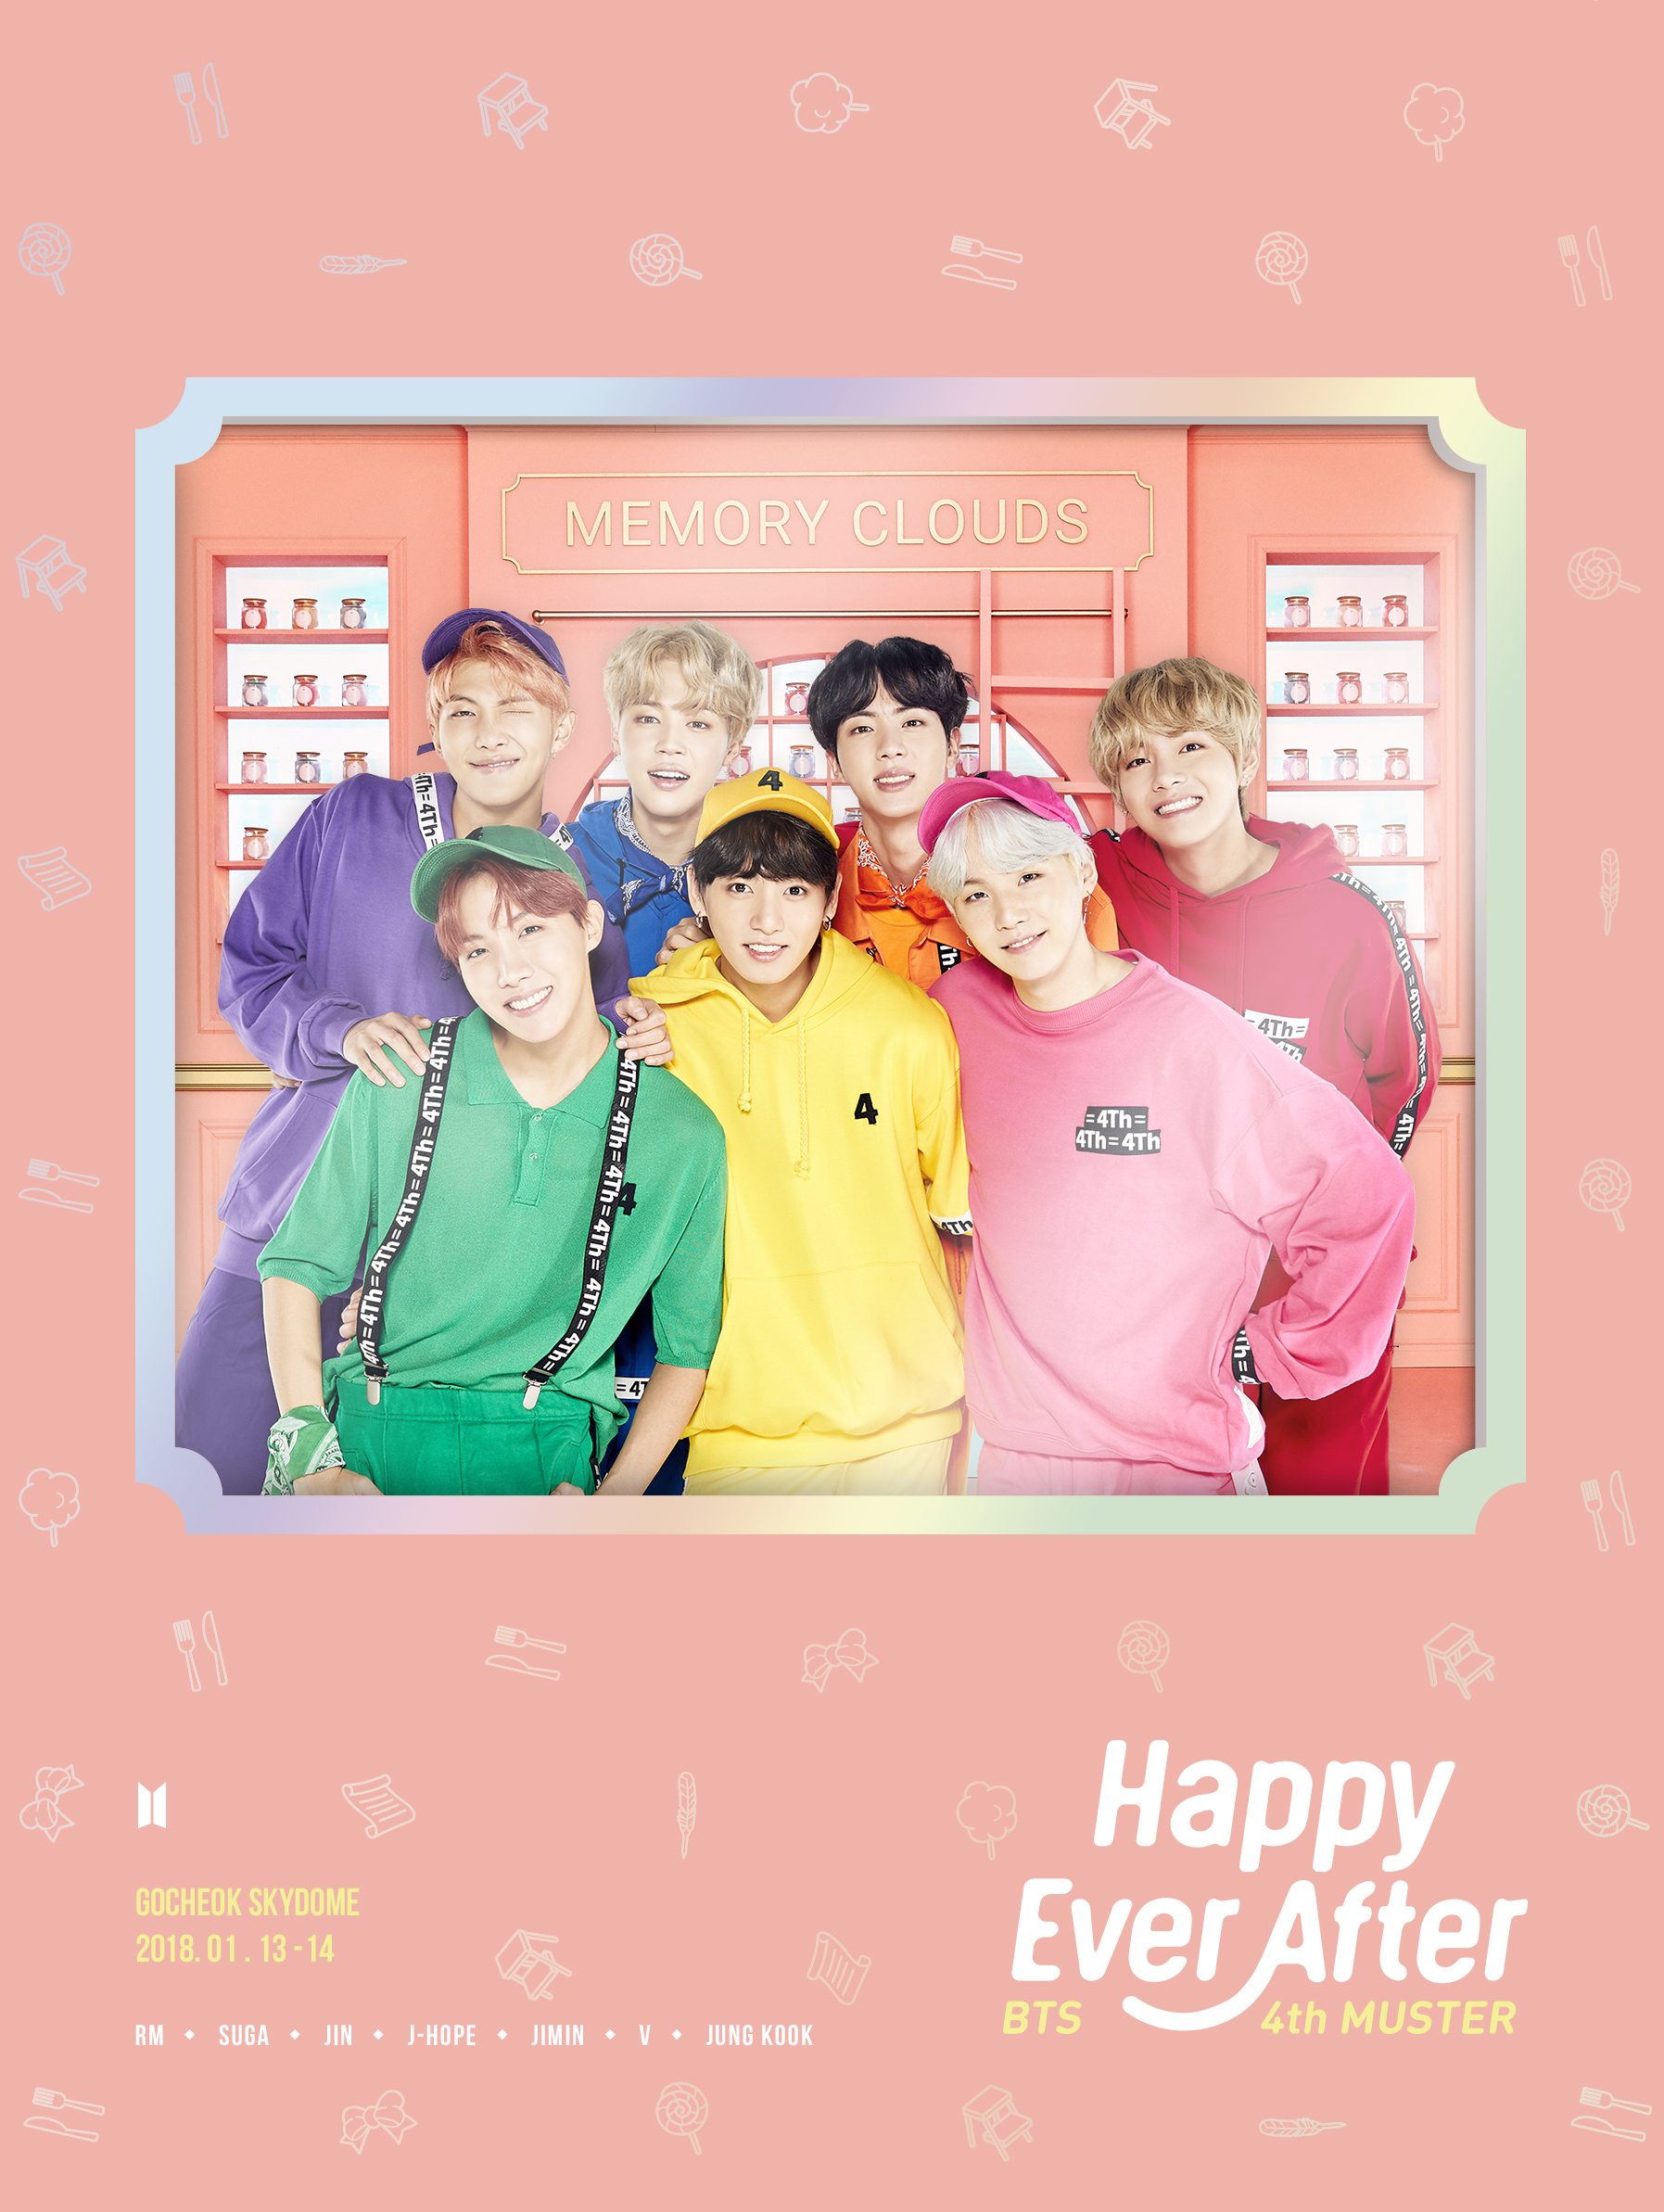 BTS Community Posts - BTS Behind special 4th MUSTER [Happy Ever 